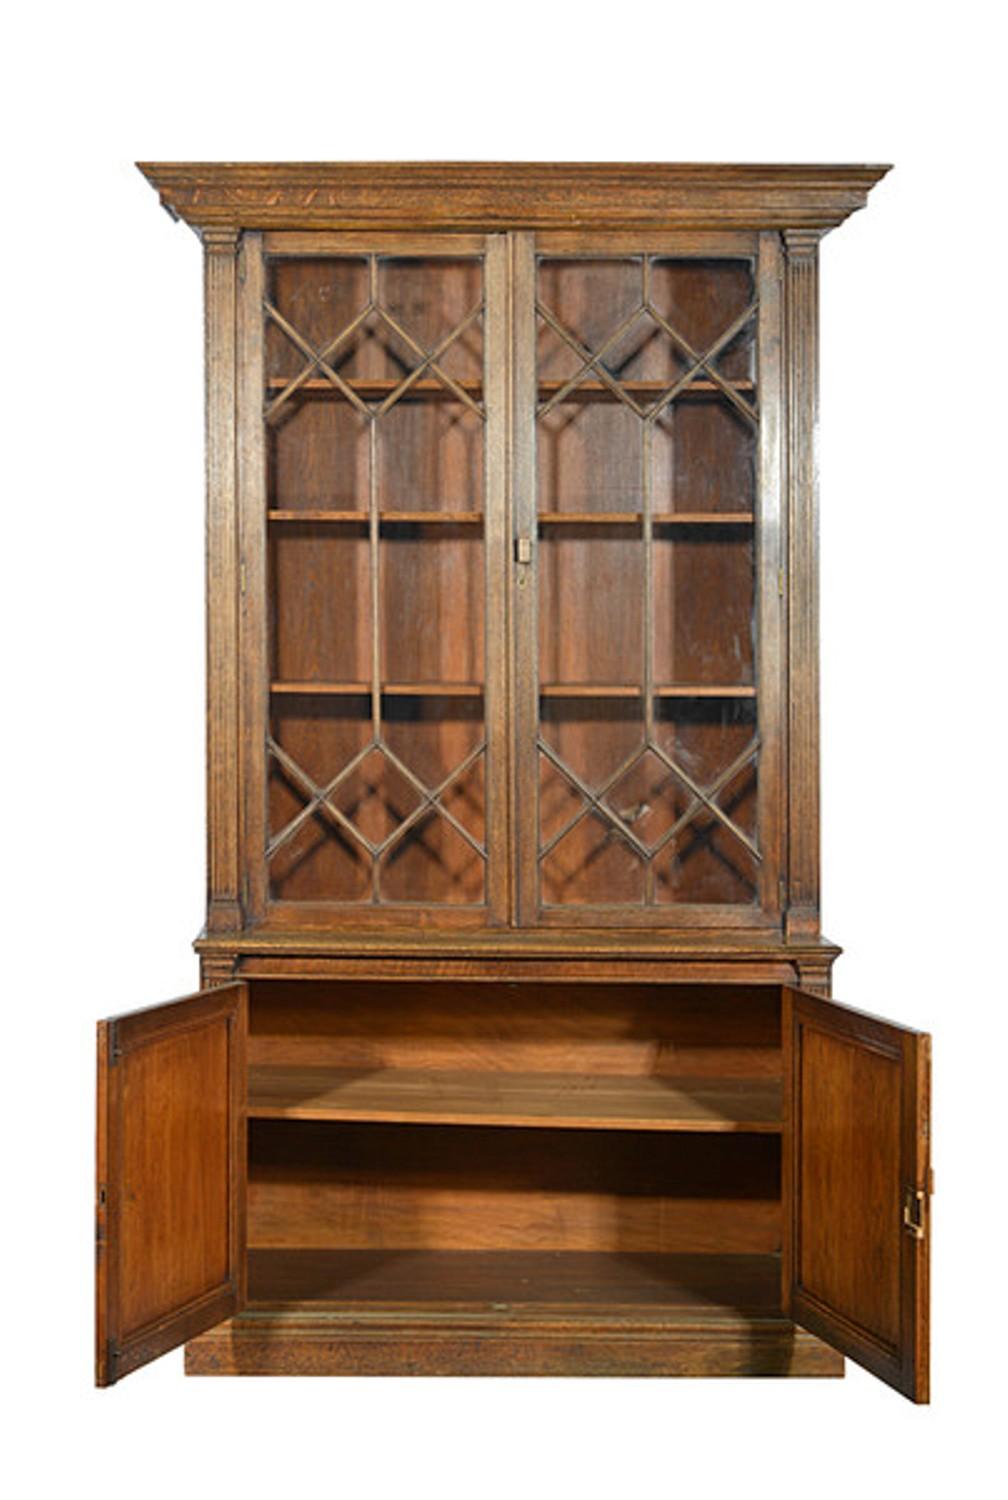 A Late 19th century solid oak bookcase of good proportions and with a clean classic architectural feel.

The top section with a wide angled and stepped pediment sits above a pair of astral glazed doors enclosing three adjustable shelves.

The